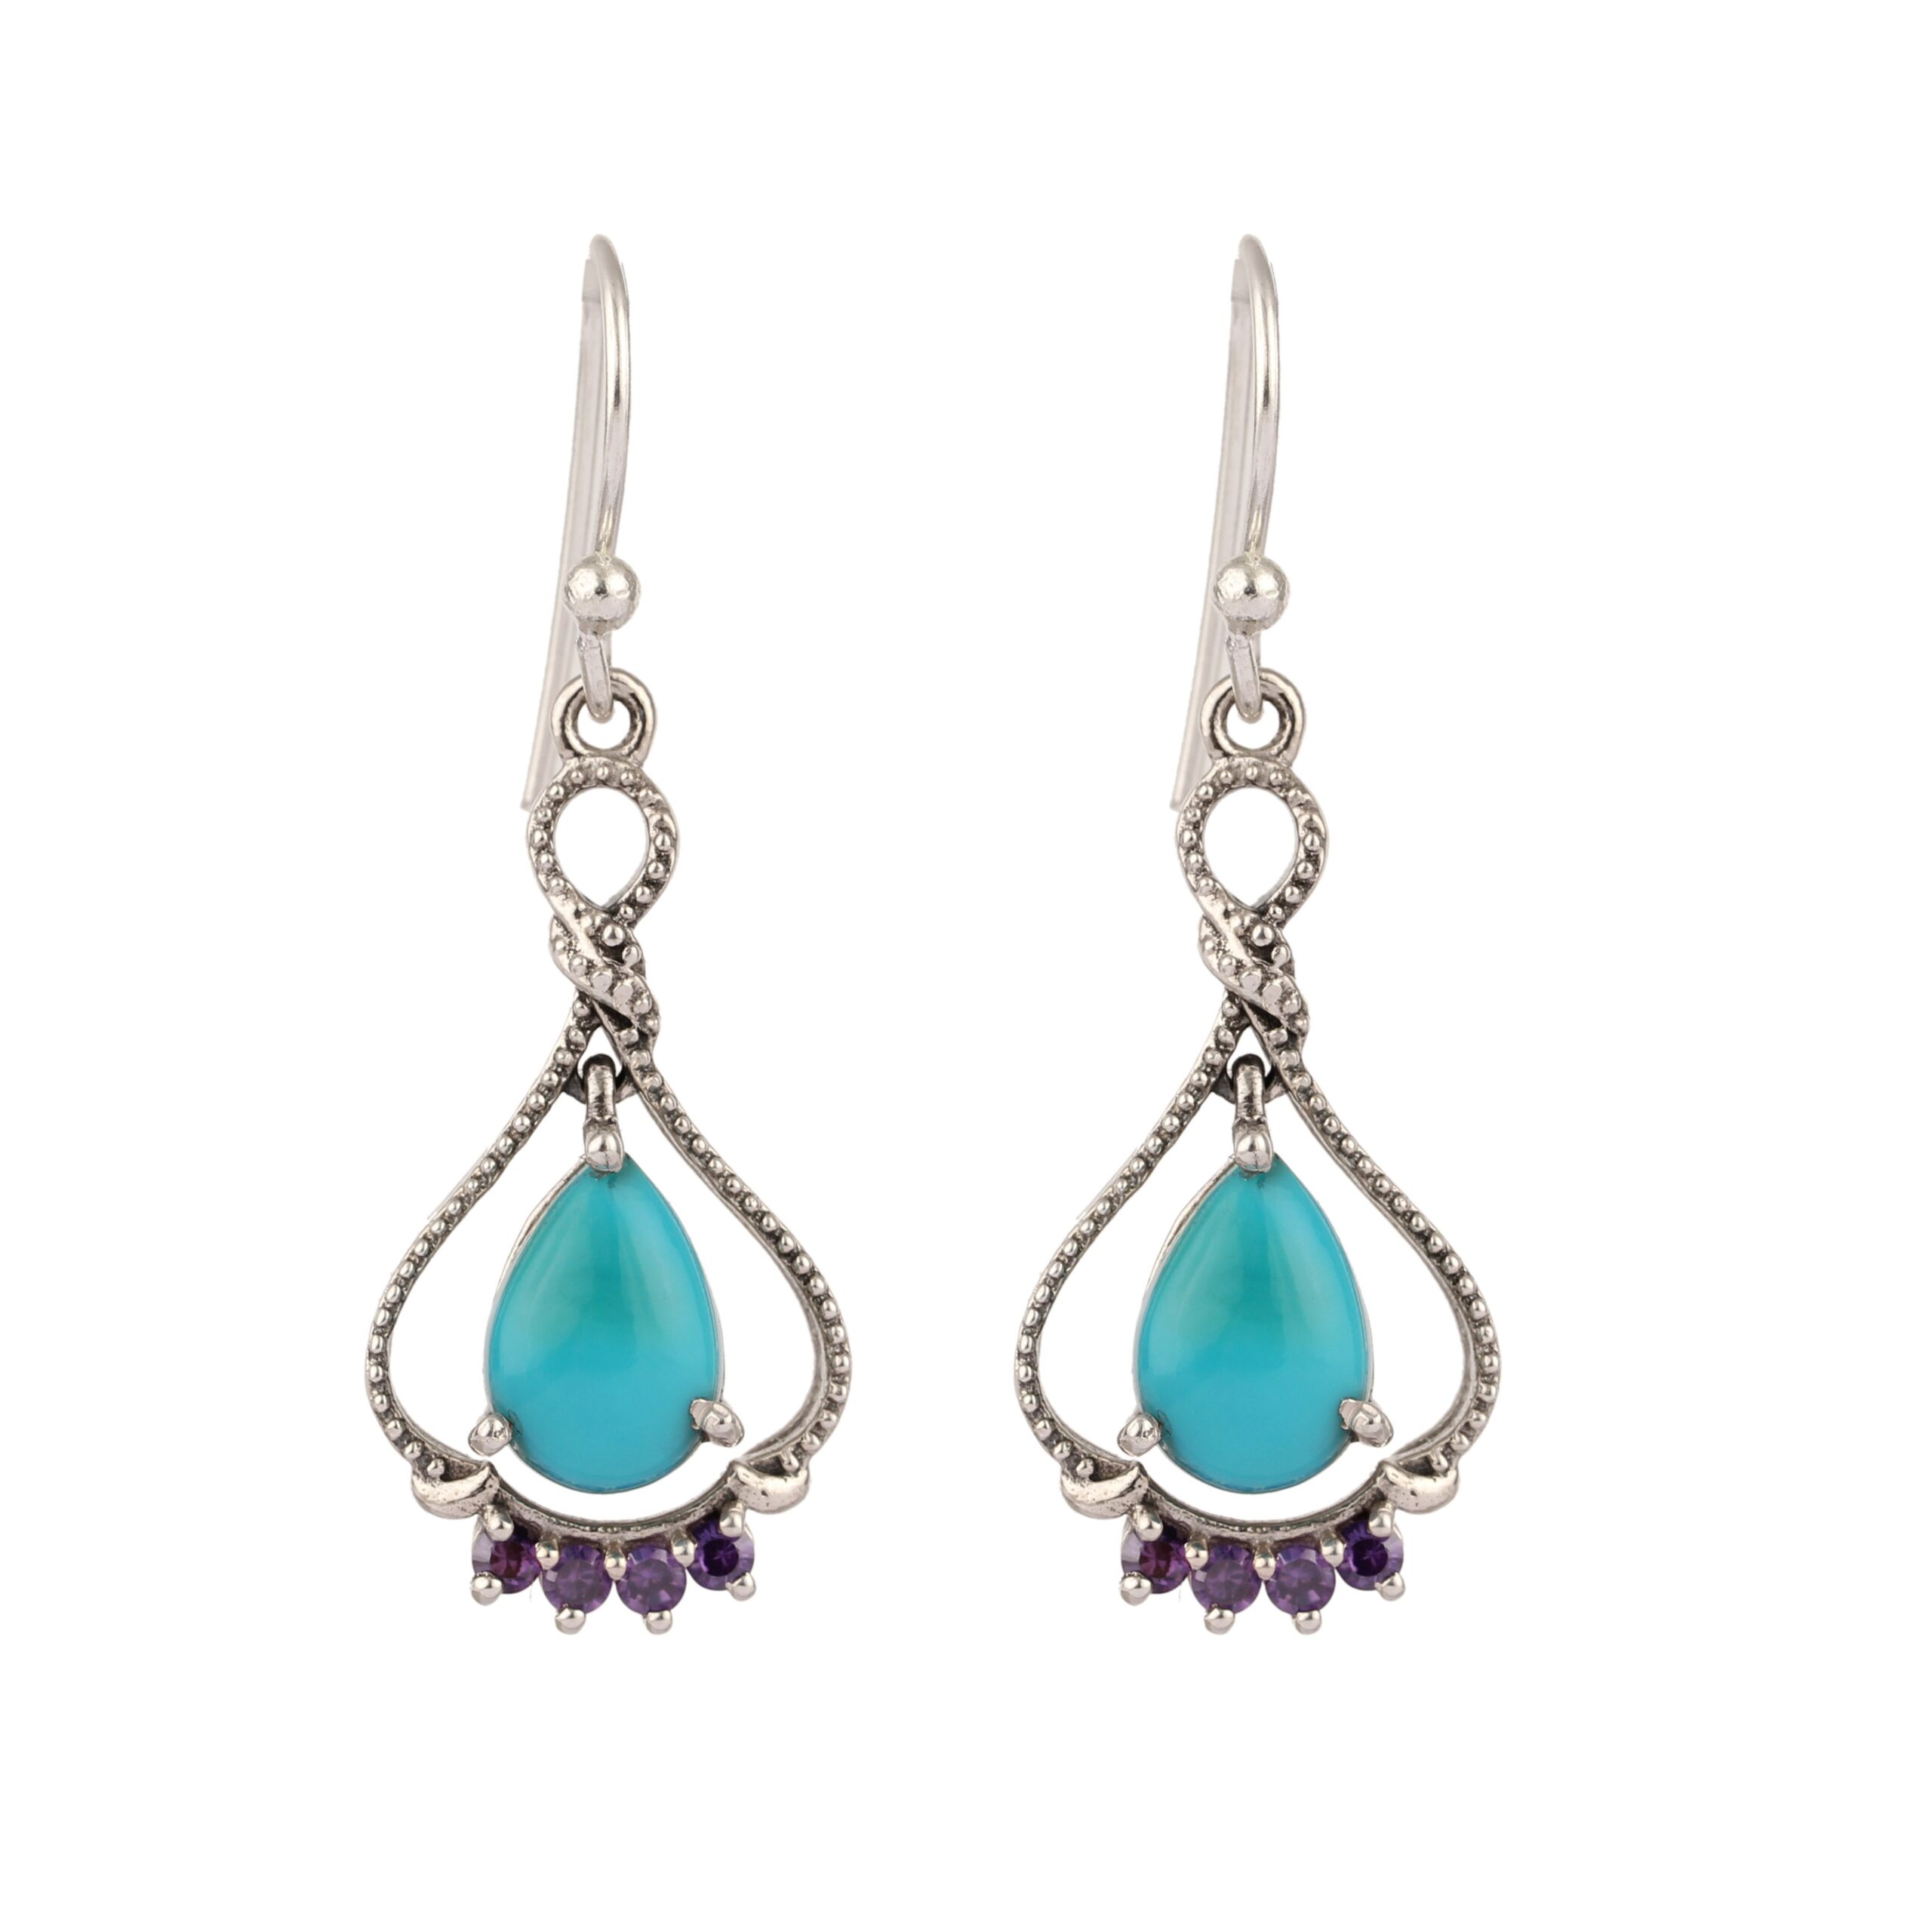 925 Sterling Silver Jewelry With Turquoise and Amethyst Gemstone Earring